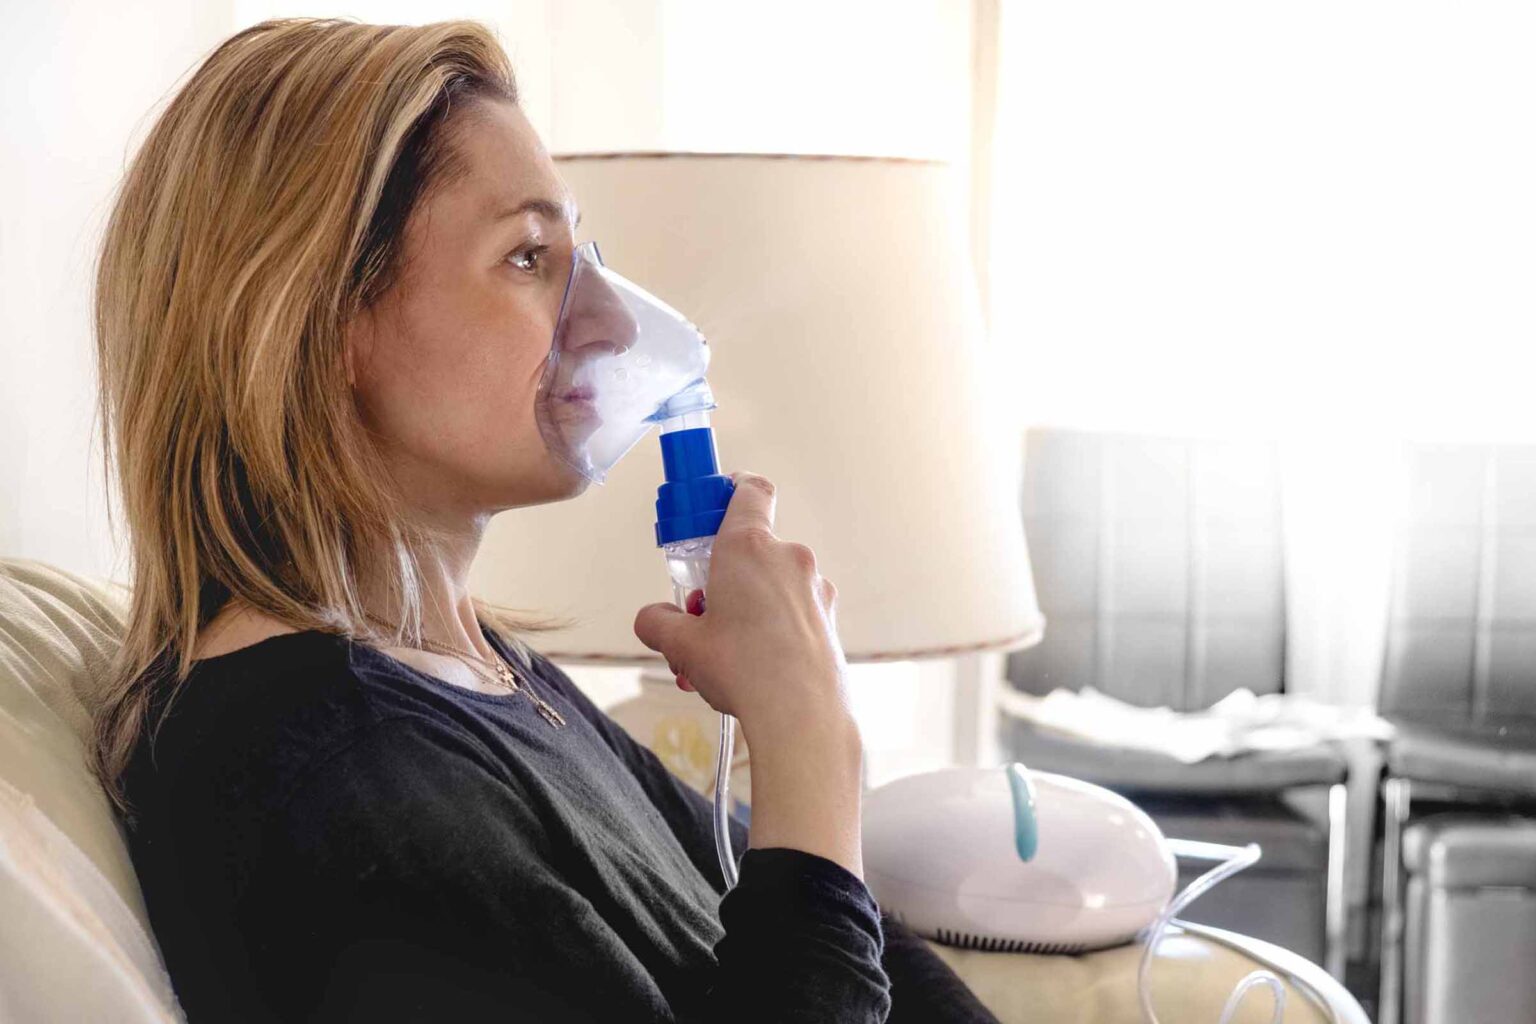 Do you need a nebulizer? There are a lot on the market so choosing the right one can be daunting. Learn about the best features for nebulizers.